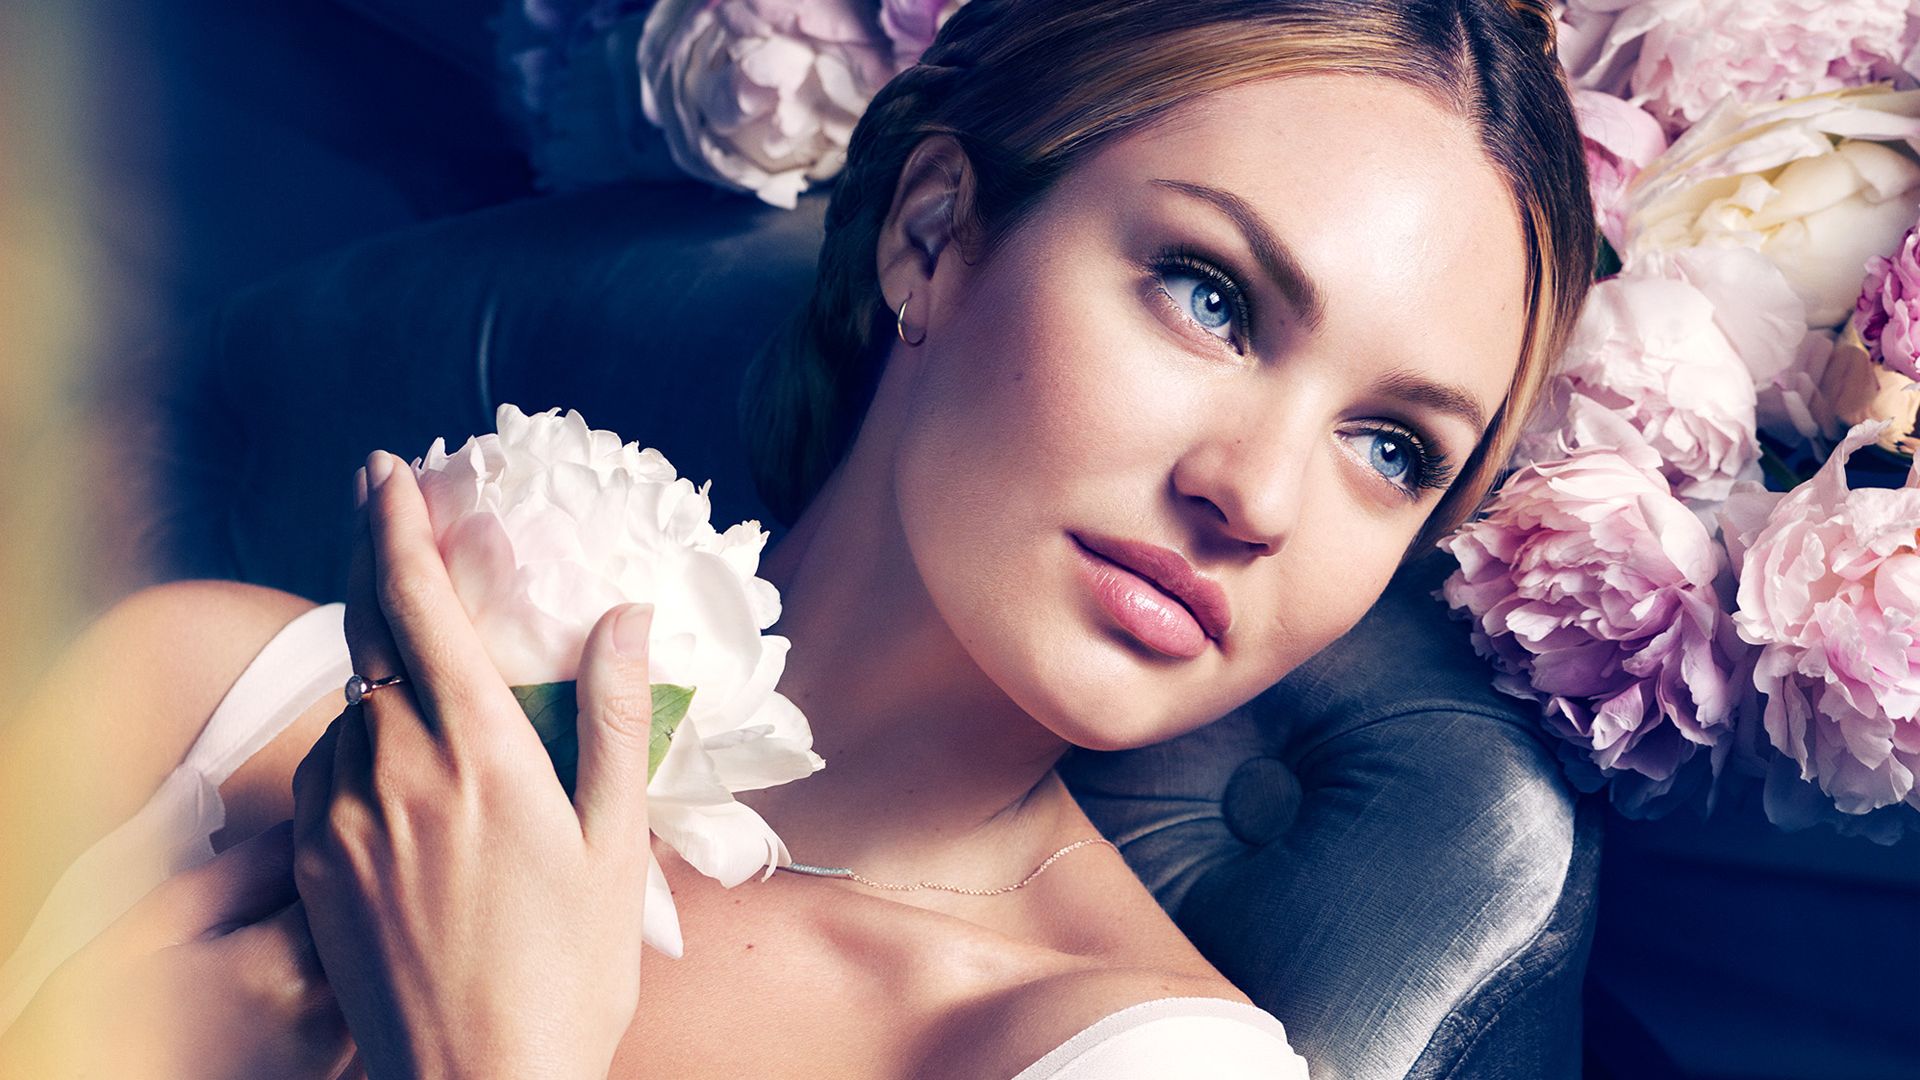 Wallpaper Candice Swanepoel on max factor